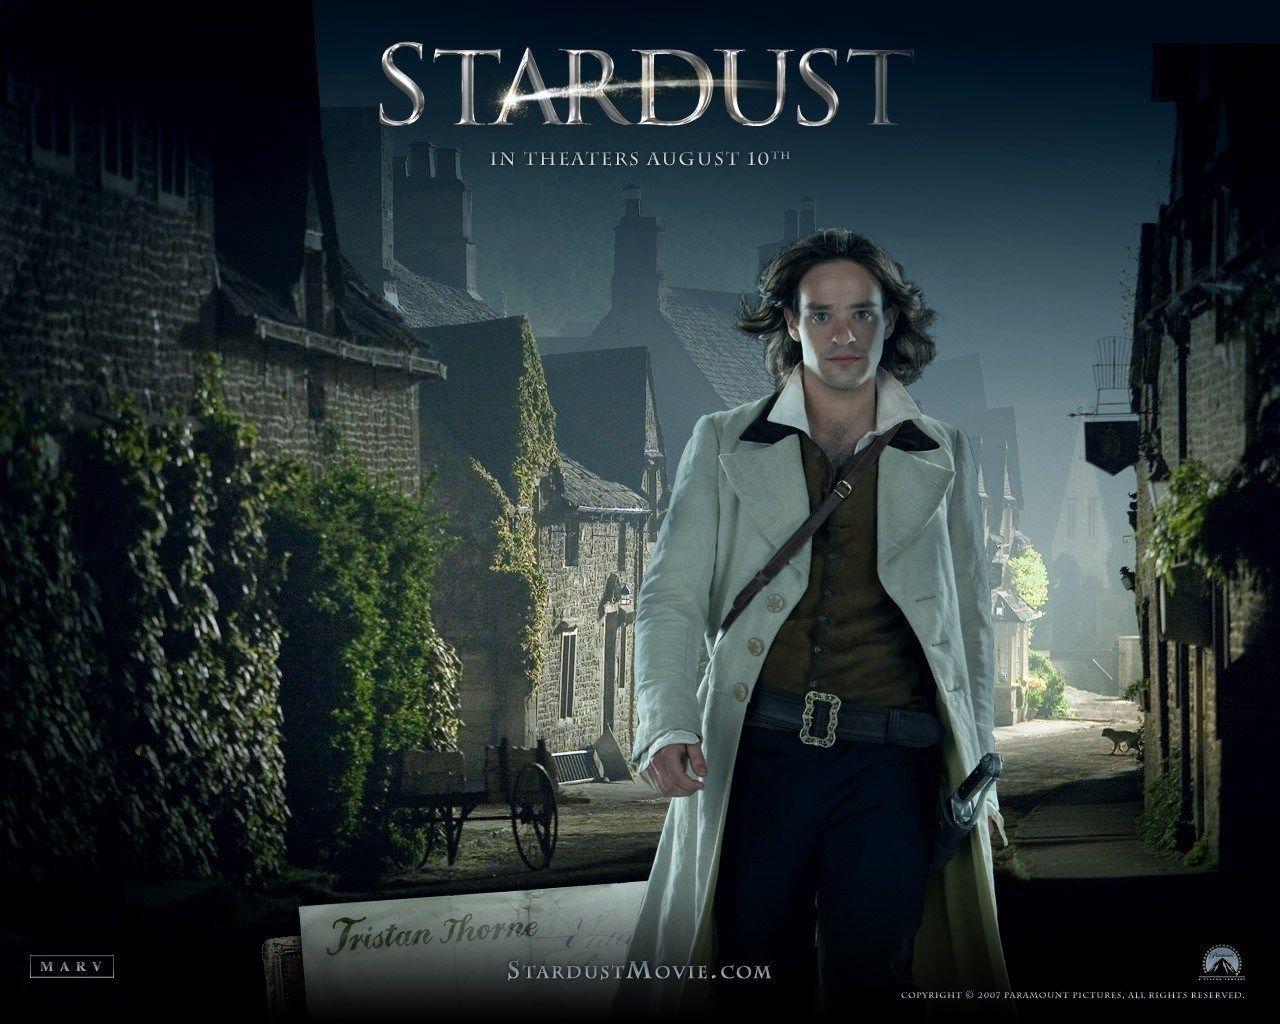 Stardust. This really could have been a great movie. I